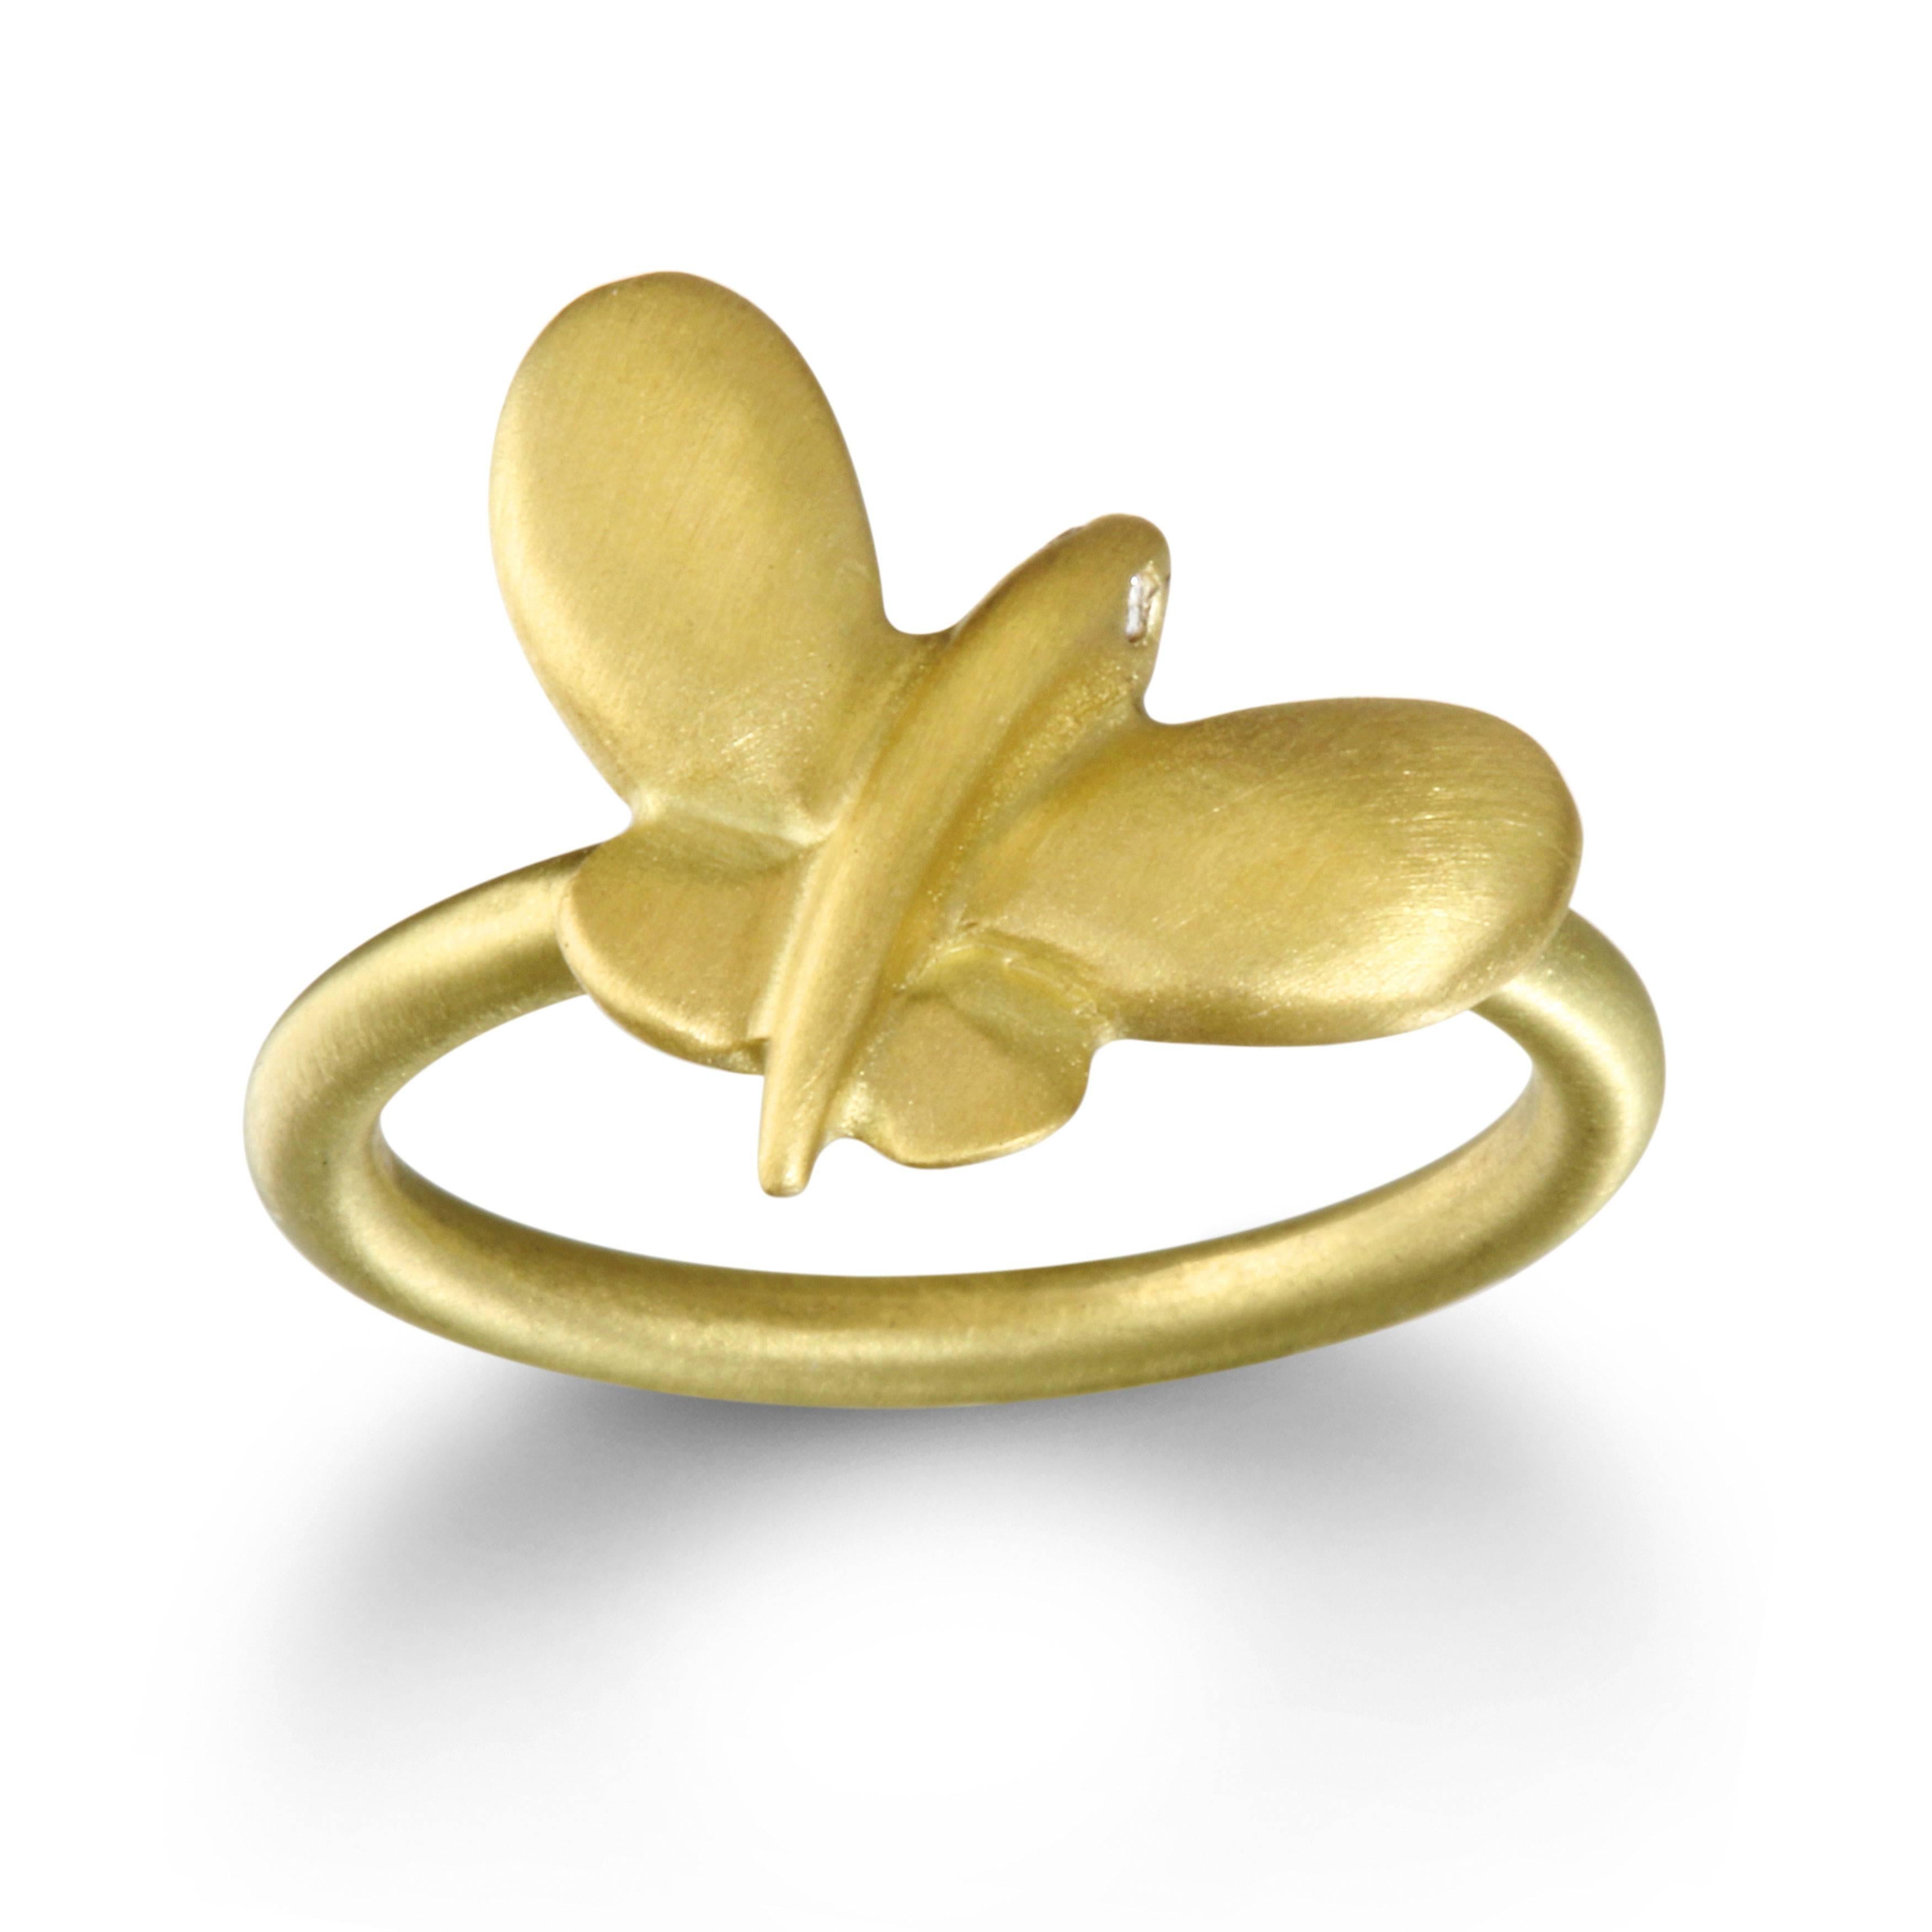 Faye Kim 18K Gold Butterfly Ring with Diamond Eyes. Butterflies are often associated with our souls and seen as a symbol of endurance, change, and hope in people's lives around the world.  

Large Butterfly Ring
Width: 5/8